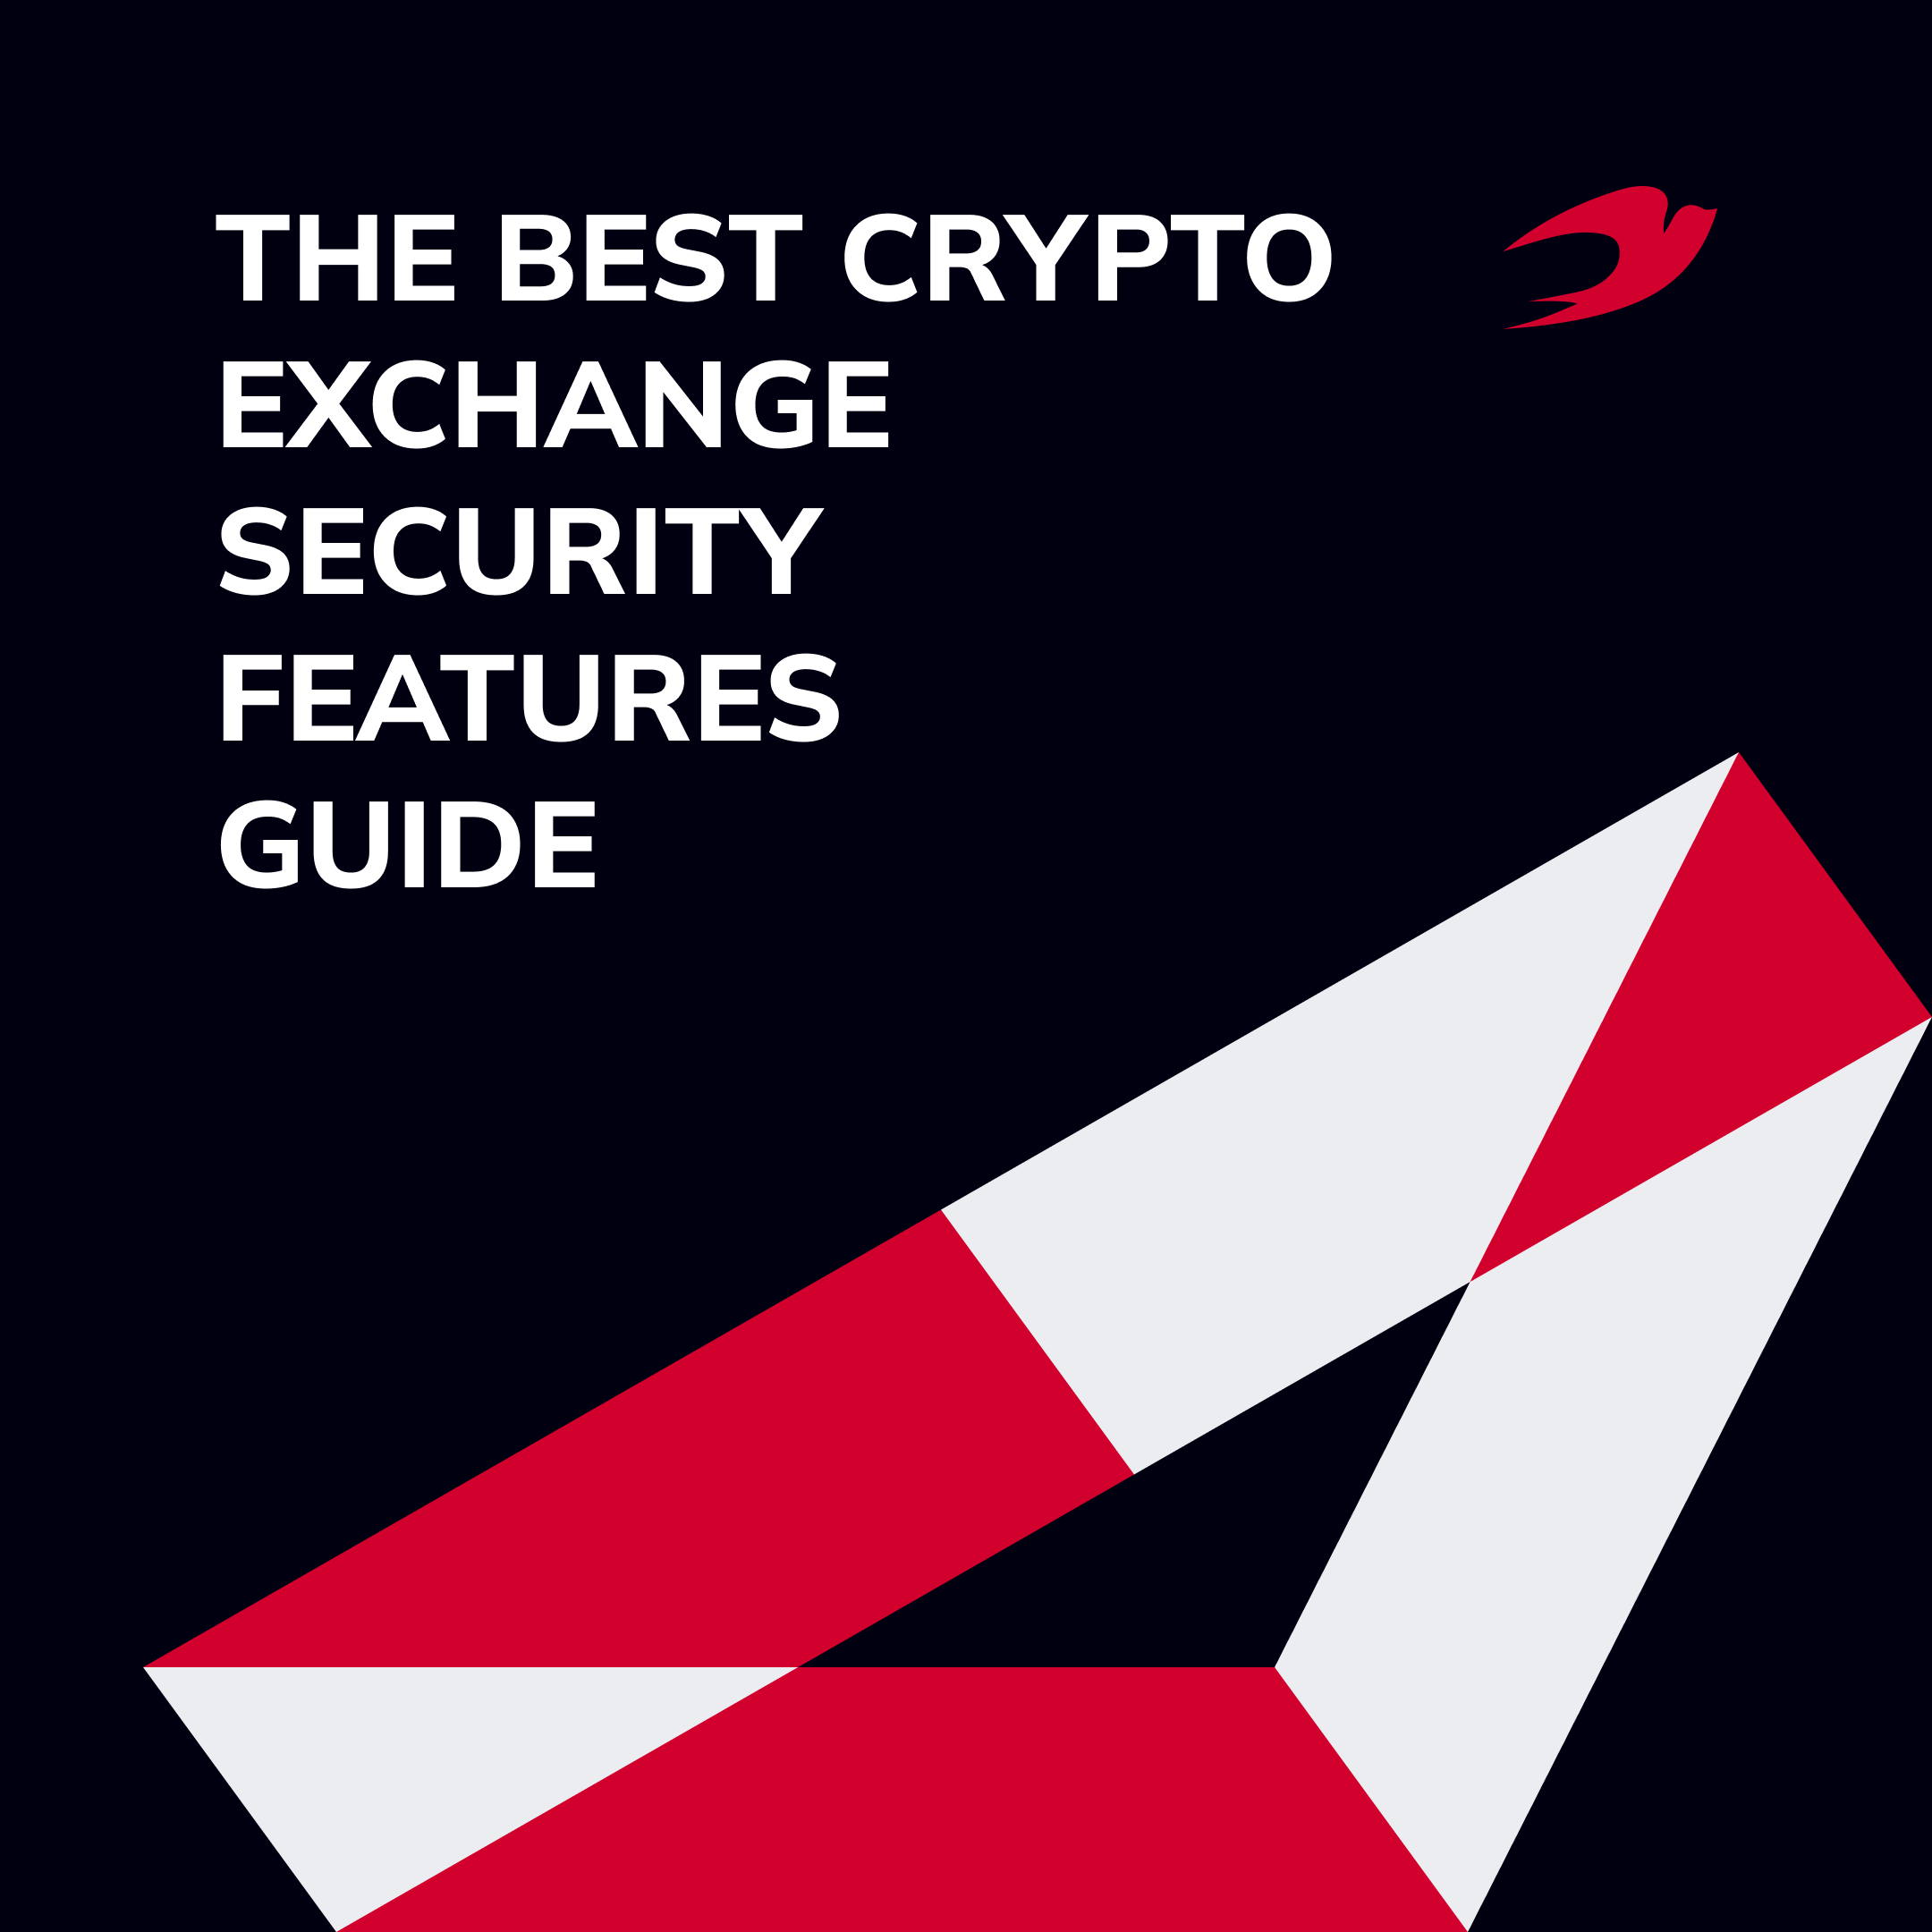 The Best Crypto Exchange Security Features